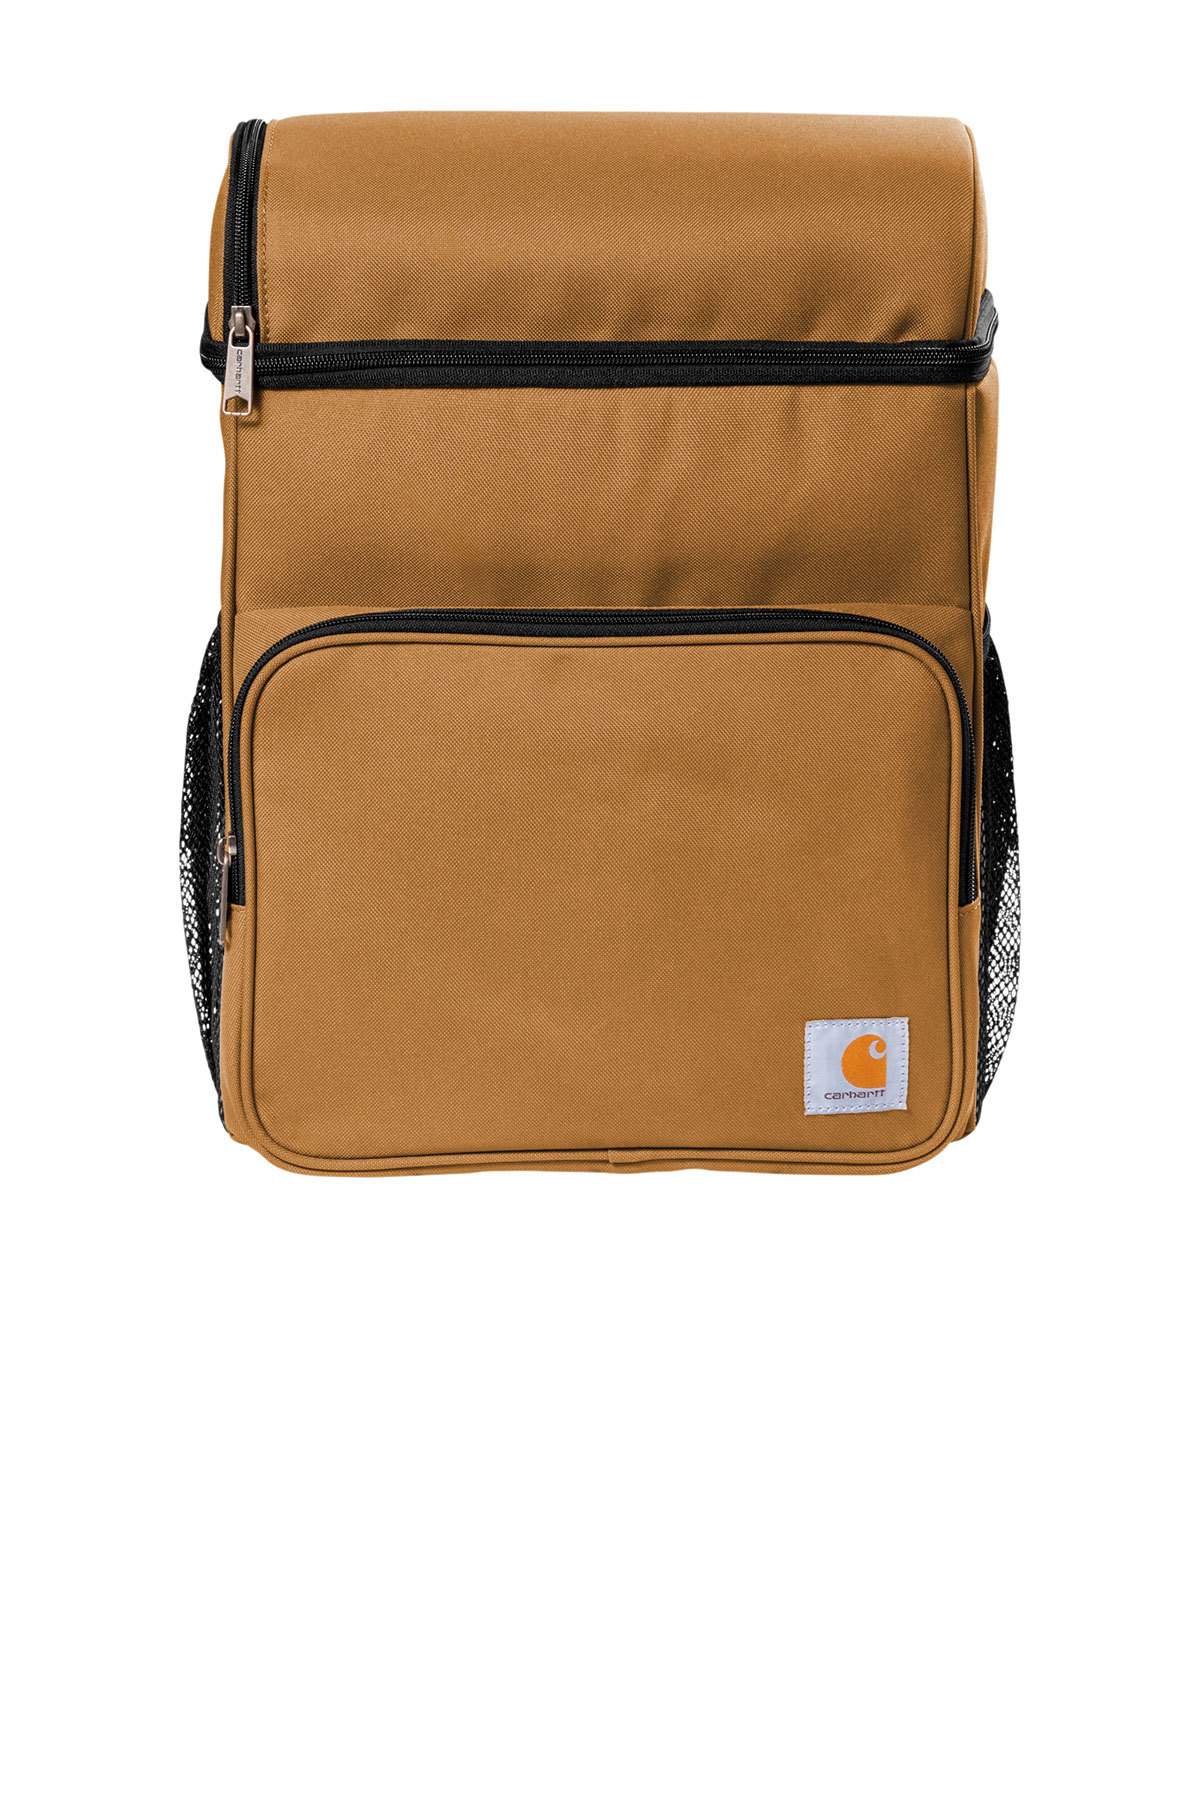 Carhartt Backpack 20-Can Cooler | Product | SanMar